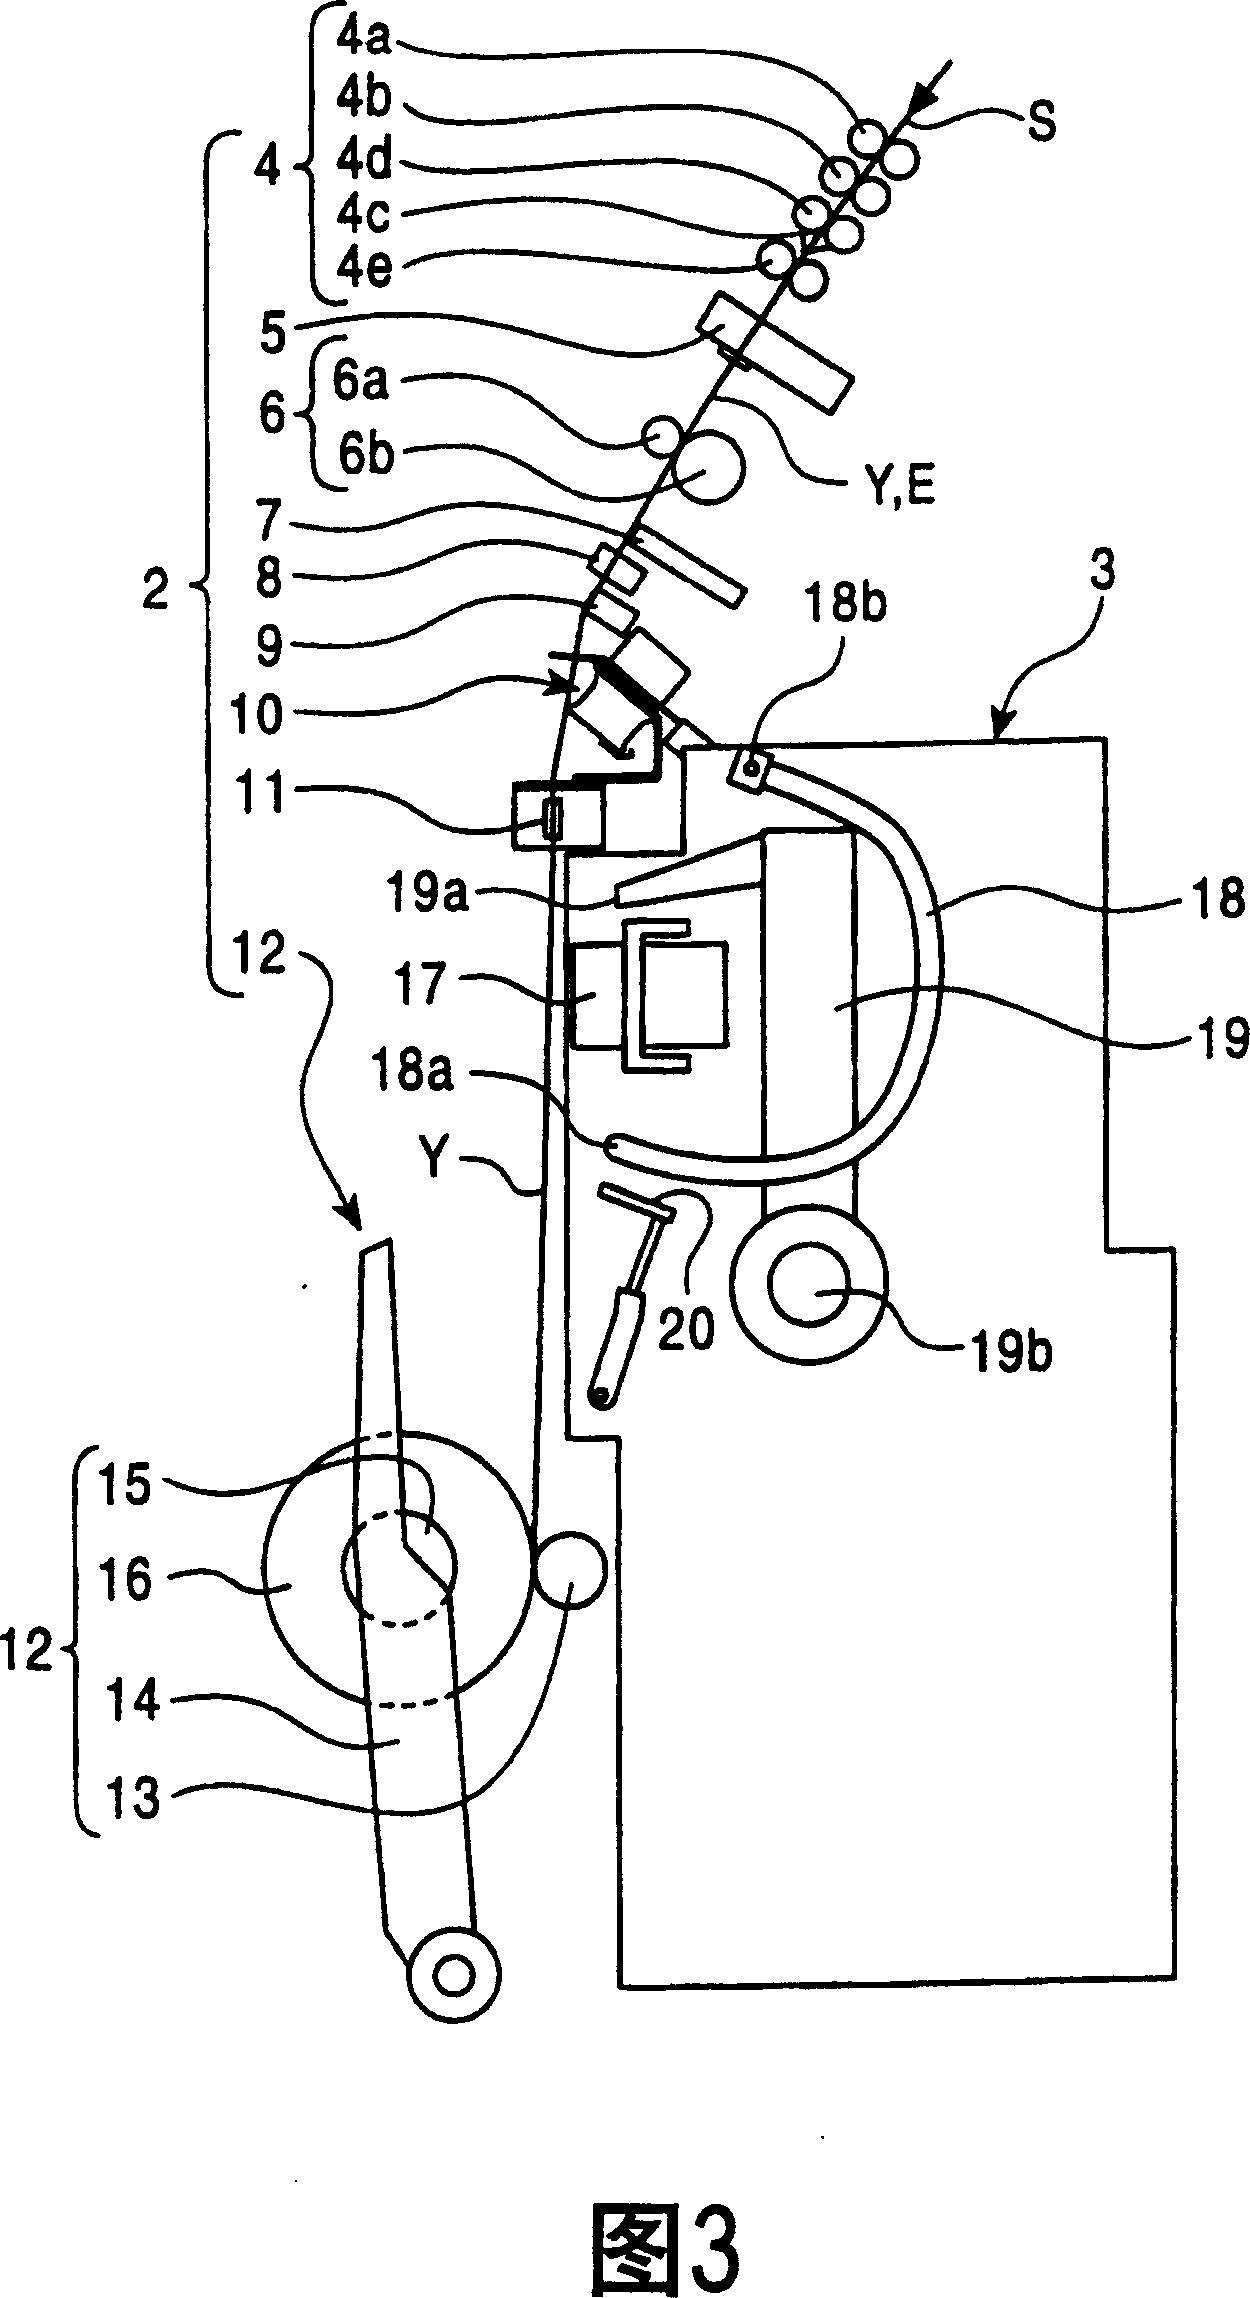 Coiling apparatus of yarn